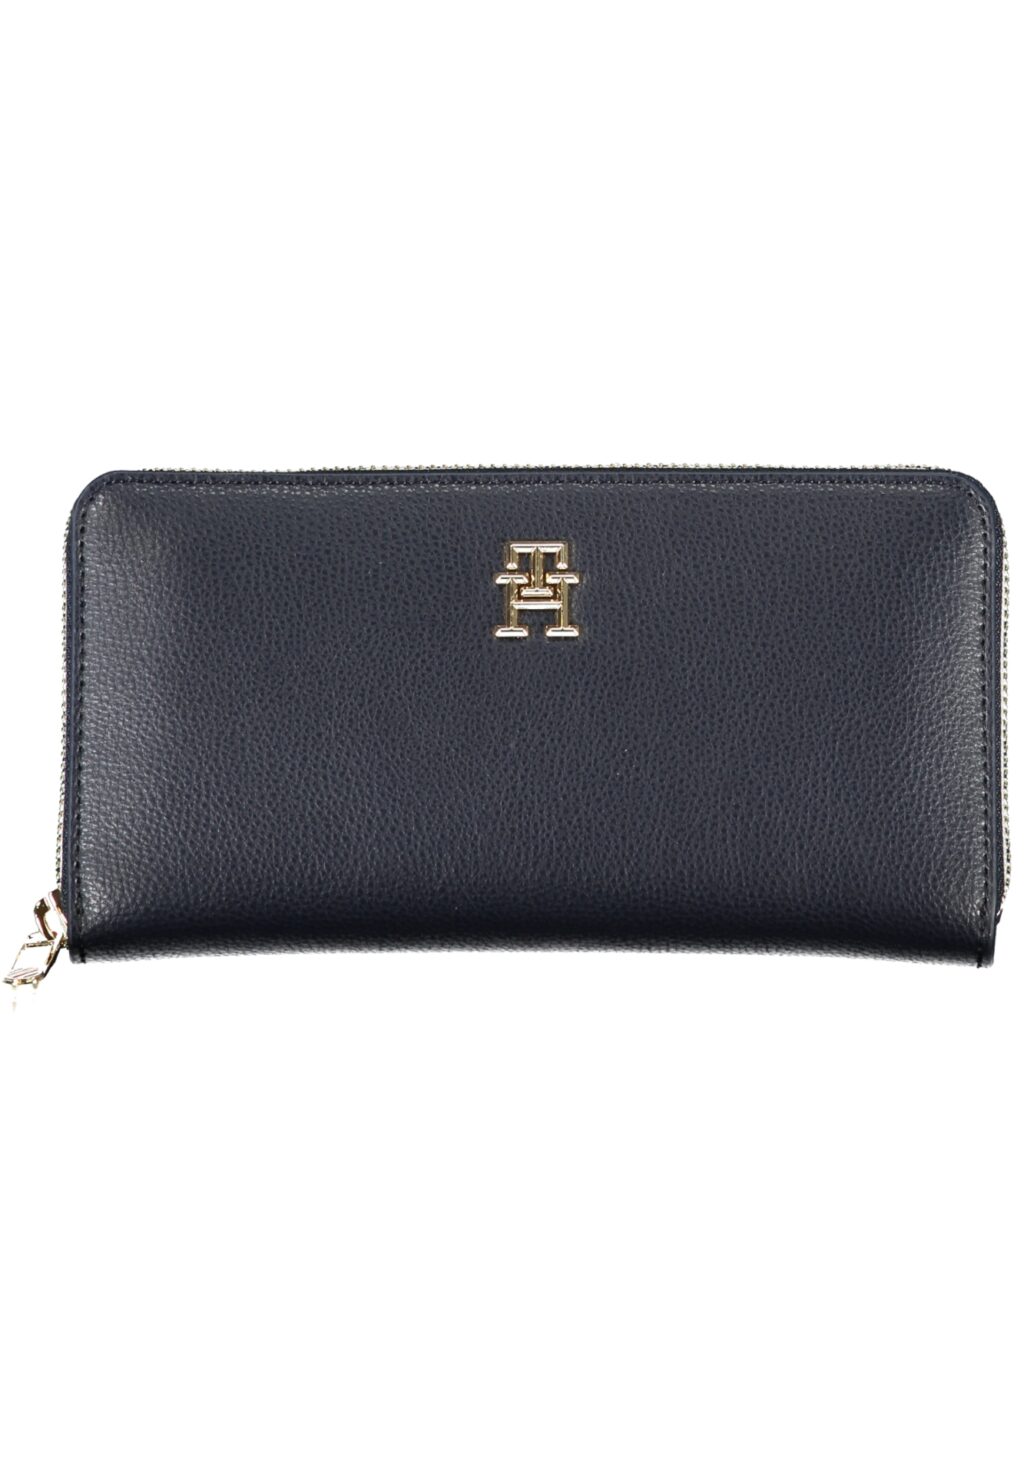 TOMMY HILFIGER WOMEN'S WALLET BLUE AW0AW16094_BLDW6